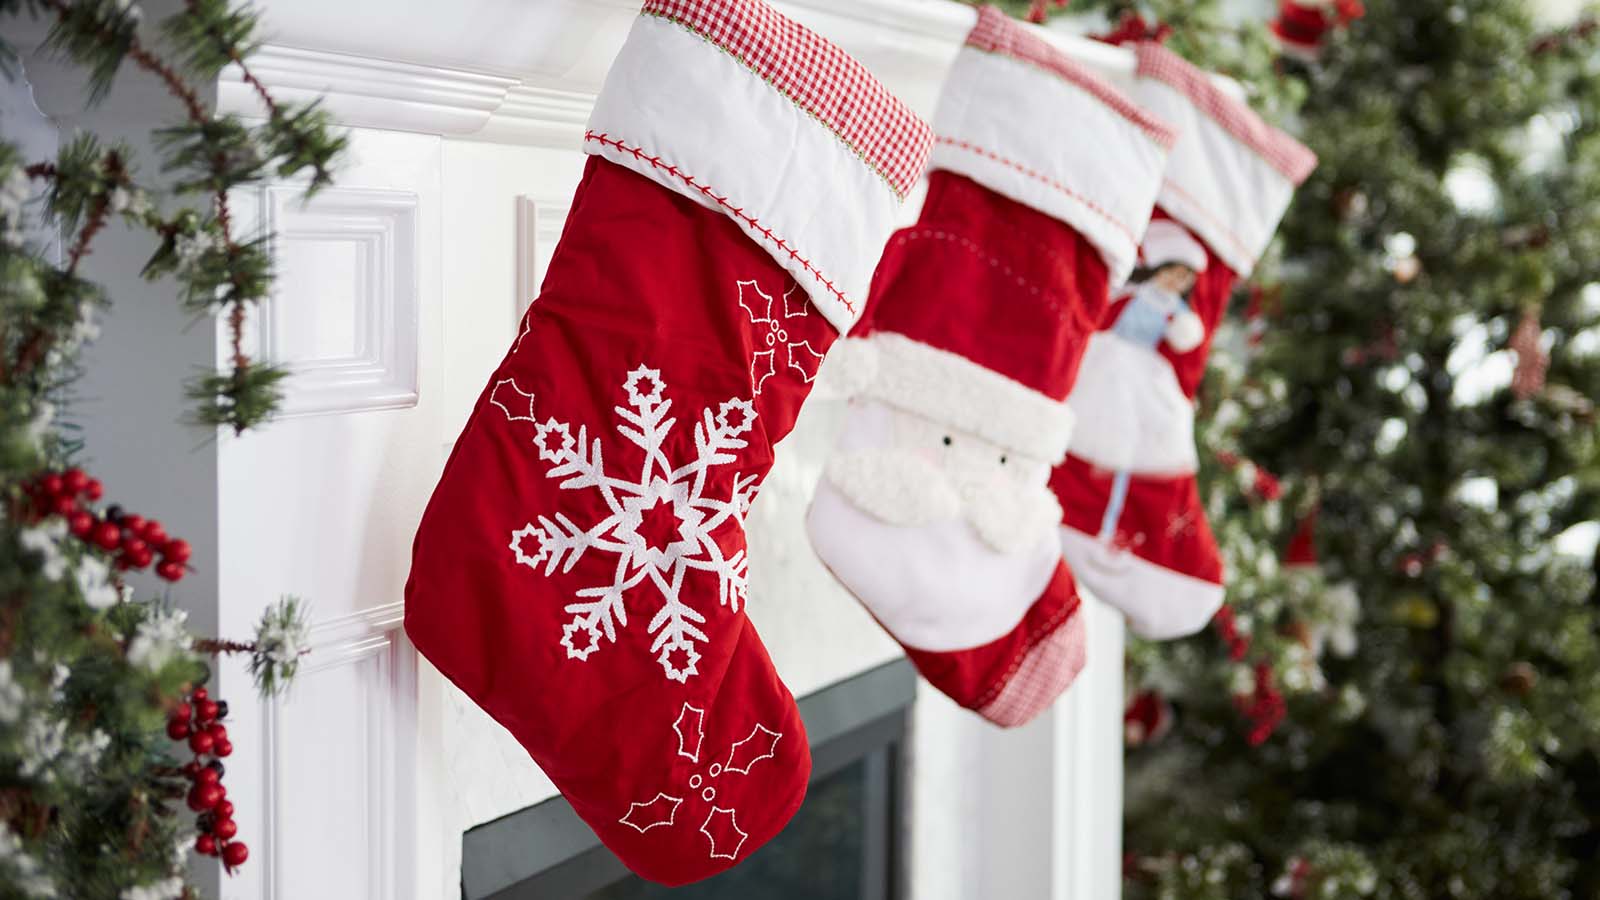 3 Stocking Stuffer Stocks to Buy for Your Loved Ones This Holiday